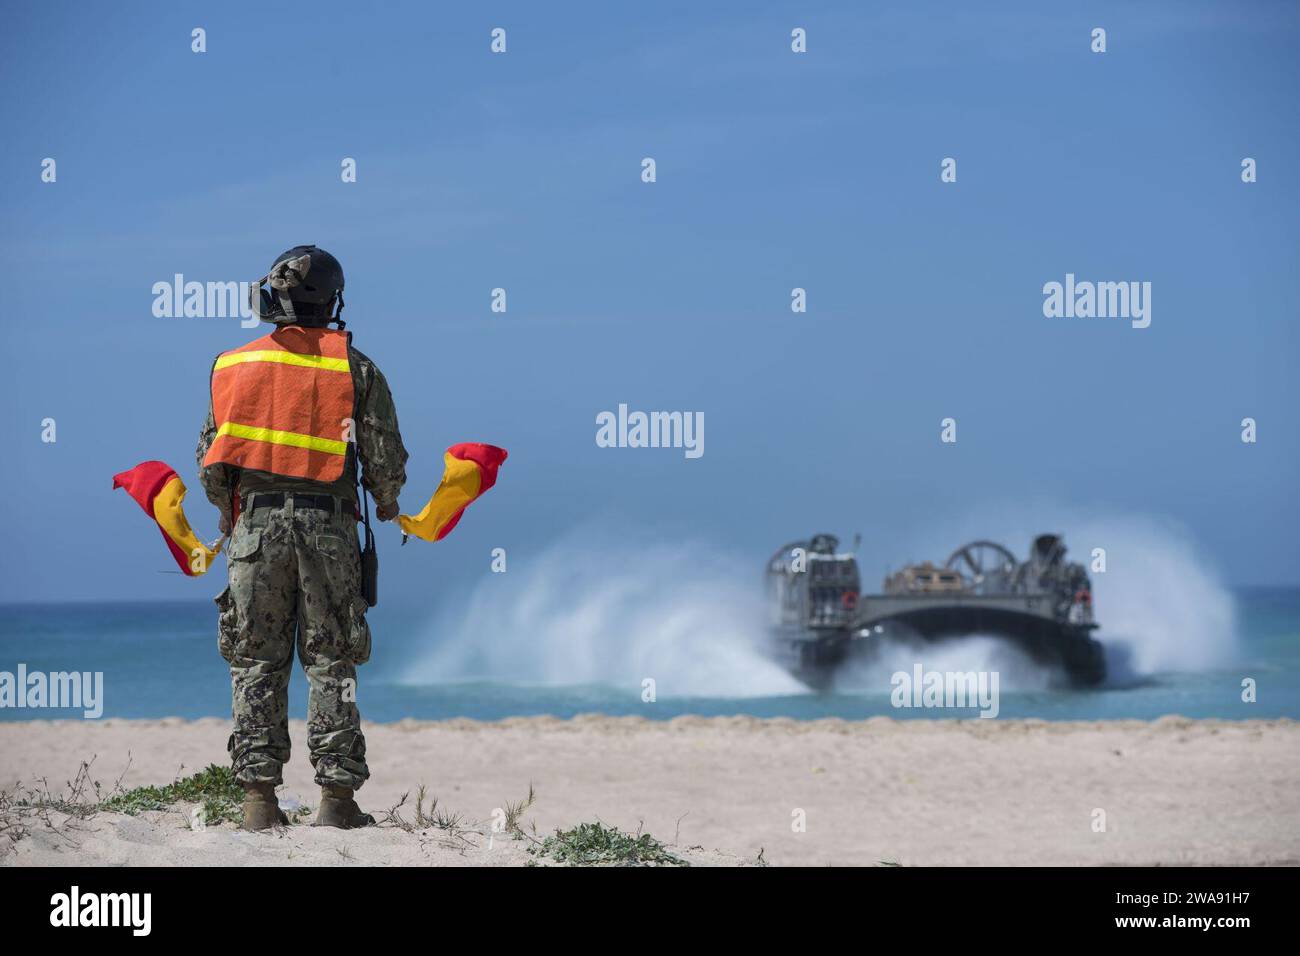 US military forces. 180307TK177-0291 HAIFA, ISRAEL (March 7, 2018) Logistics Specialist Seaman Denny Figueroa, from Bayamon, Puerto Rico, and assigned to Beach Master Unit (BMU) 2, signals Landing Craft, Air Cushion 67, attached to Assault Craft Unit (ACU) 4, as it prepares to make landfall on the beach in Israel, March 7, 2018. The Wasp-class amphibious assault ship USS Iwo Jima (LHD 7), homeported in Mayport, Florida, is participating in Juniper Cobra 2018 and conducting naval operations in the U.S 6th Fleet area of operations. JC18 is a computer-assisted exercise conducted through computer Stock Photo